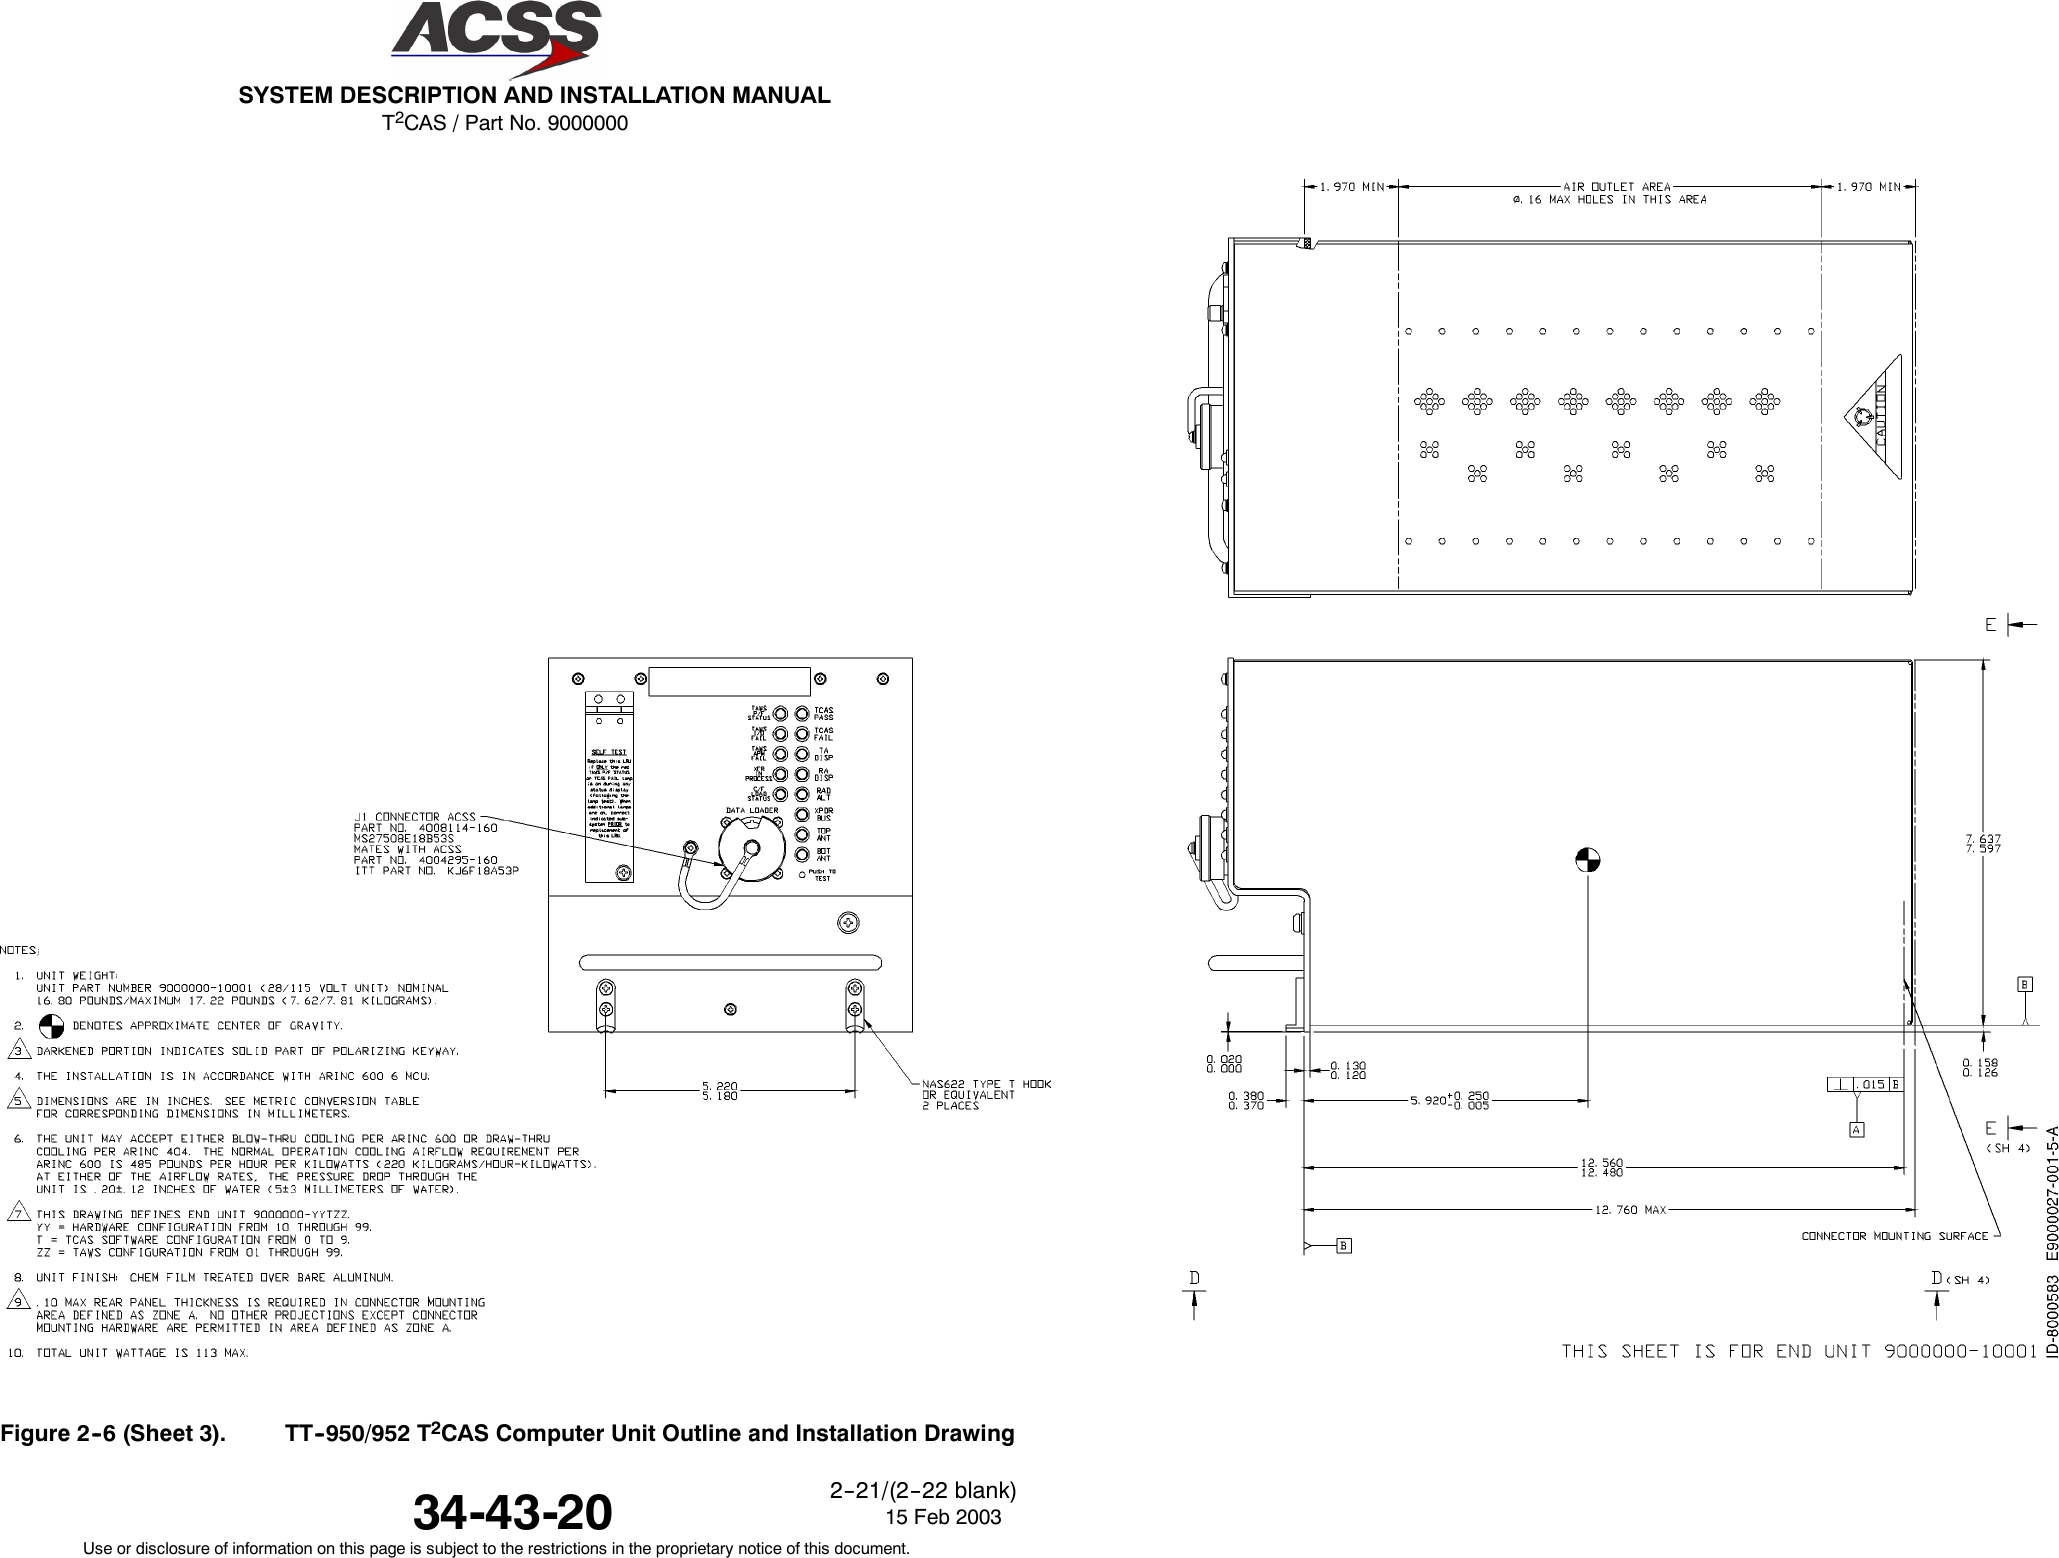 T2CAS / Part No. 9000000SYSTEM DESCRIPTION AND INSTALLATION MANUAL34-43-20 15 Feb 2003Use or disclosure of information on this page is subject to the restrictions in the proprietary notice of this document.2--21/(2--22 blank)Figure 2--6 (Sheet 3). TT--950/952 T2CAS Computer Unit Outline and Installation Drawing